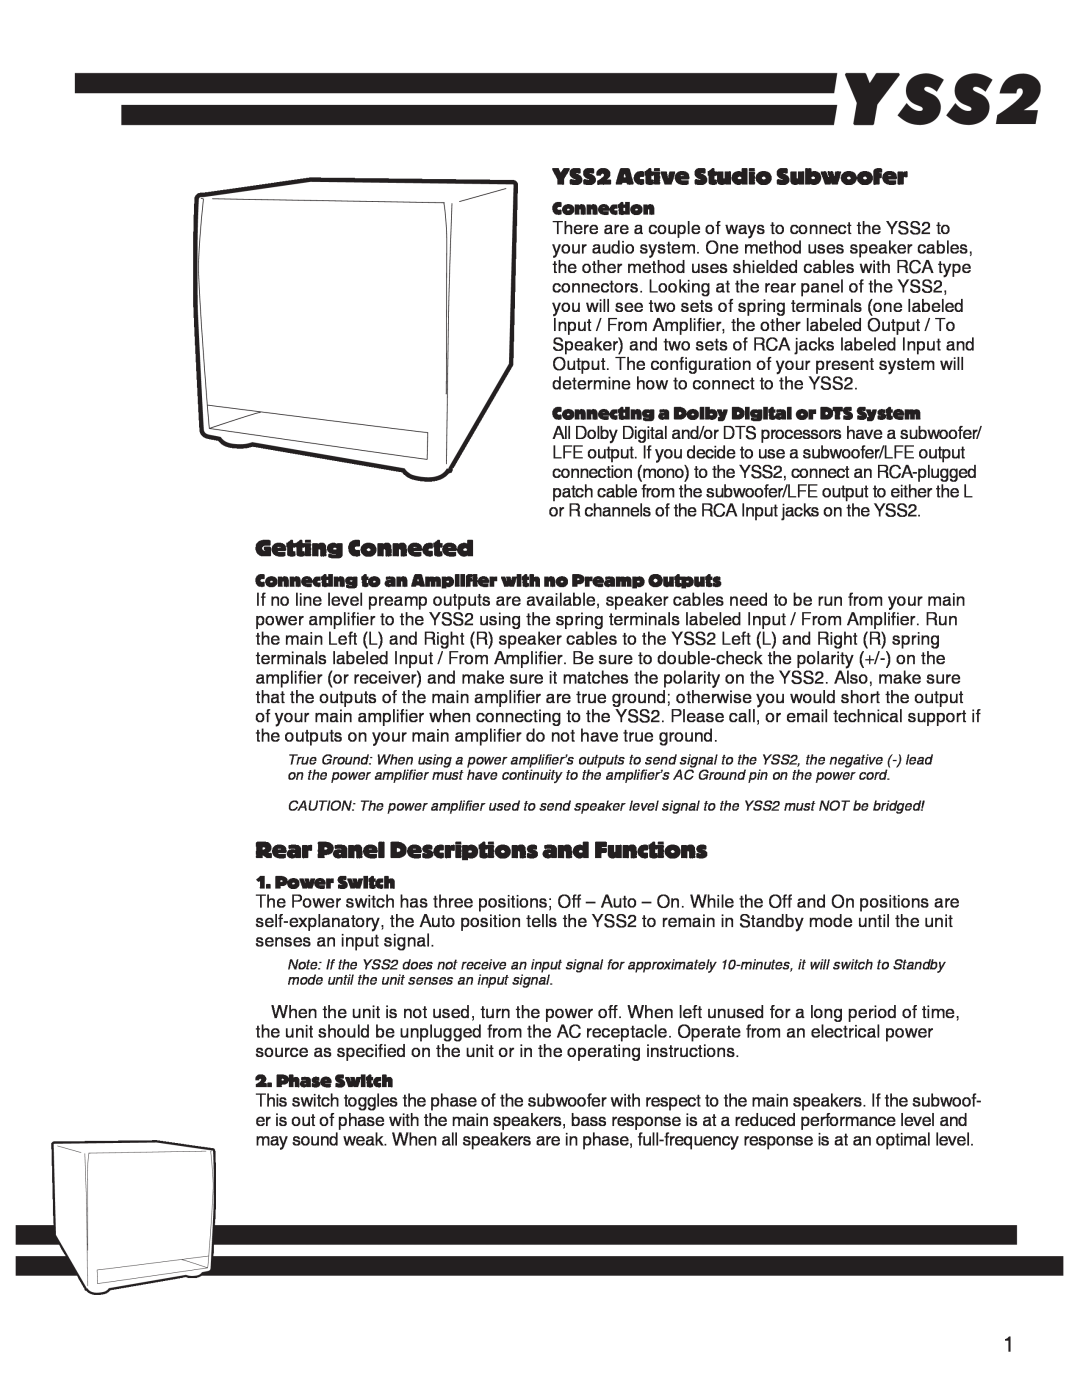 RCA YS1052 YSS2 Active Studio Subwoofer, Getting Connected, Rear Panel Descriptions and Functions, Connection 